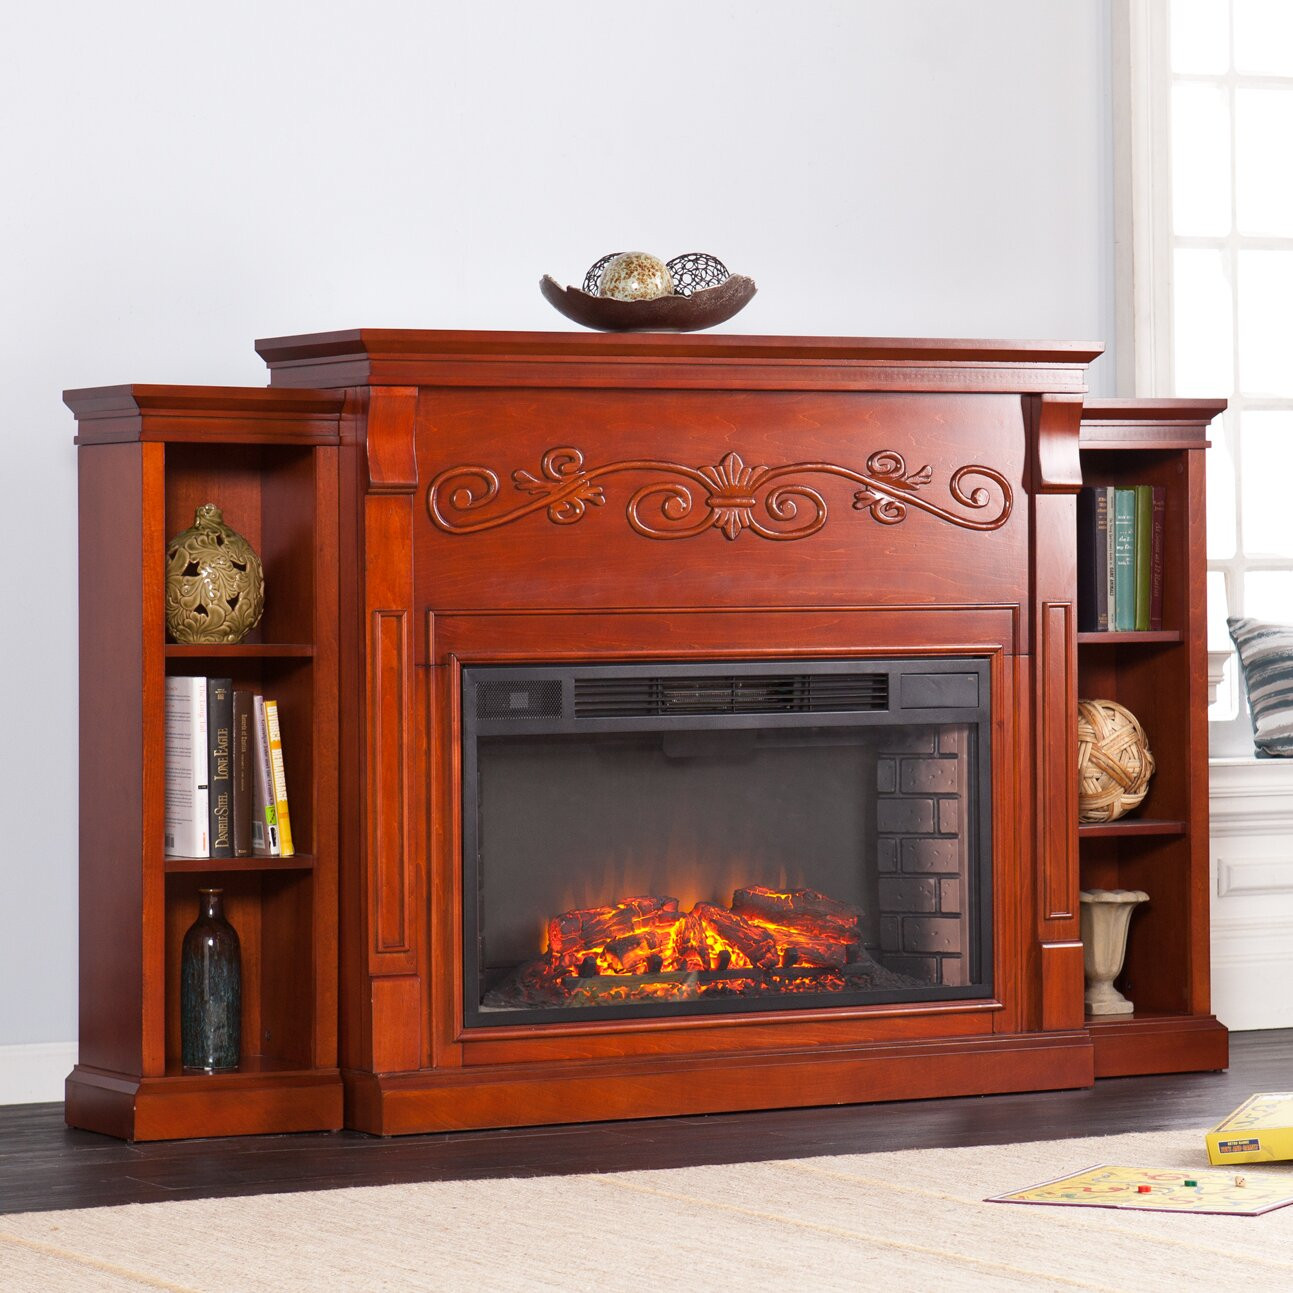 Electric Fireplace With Bookcase
 Wildon Home Langley Bookcase Electric Fireplace